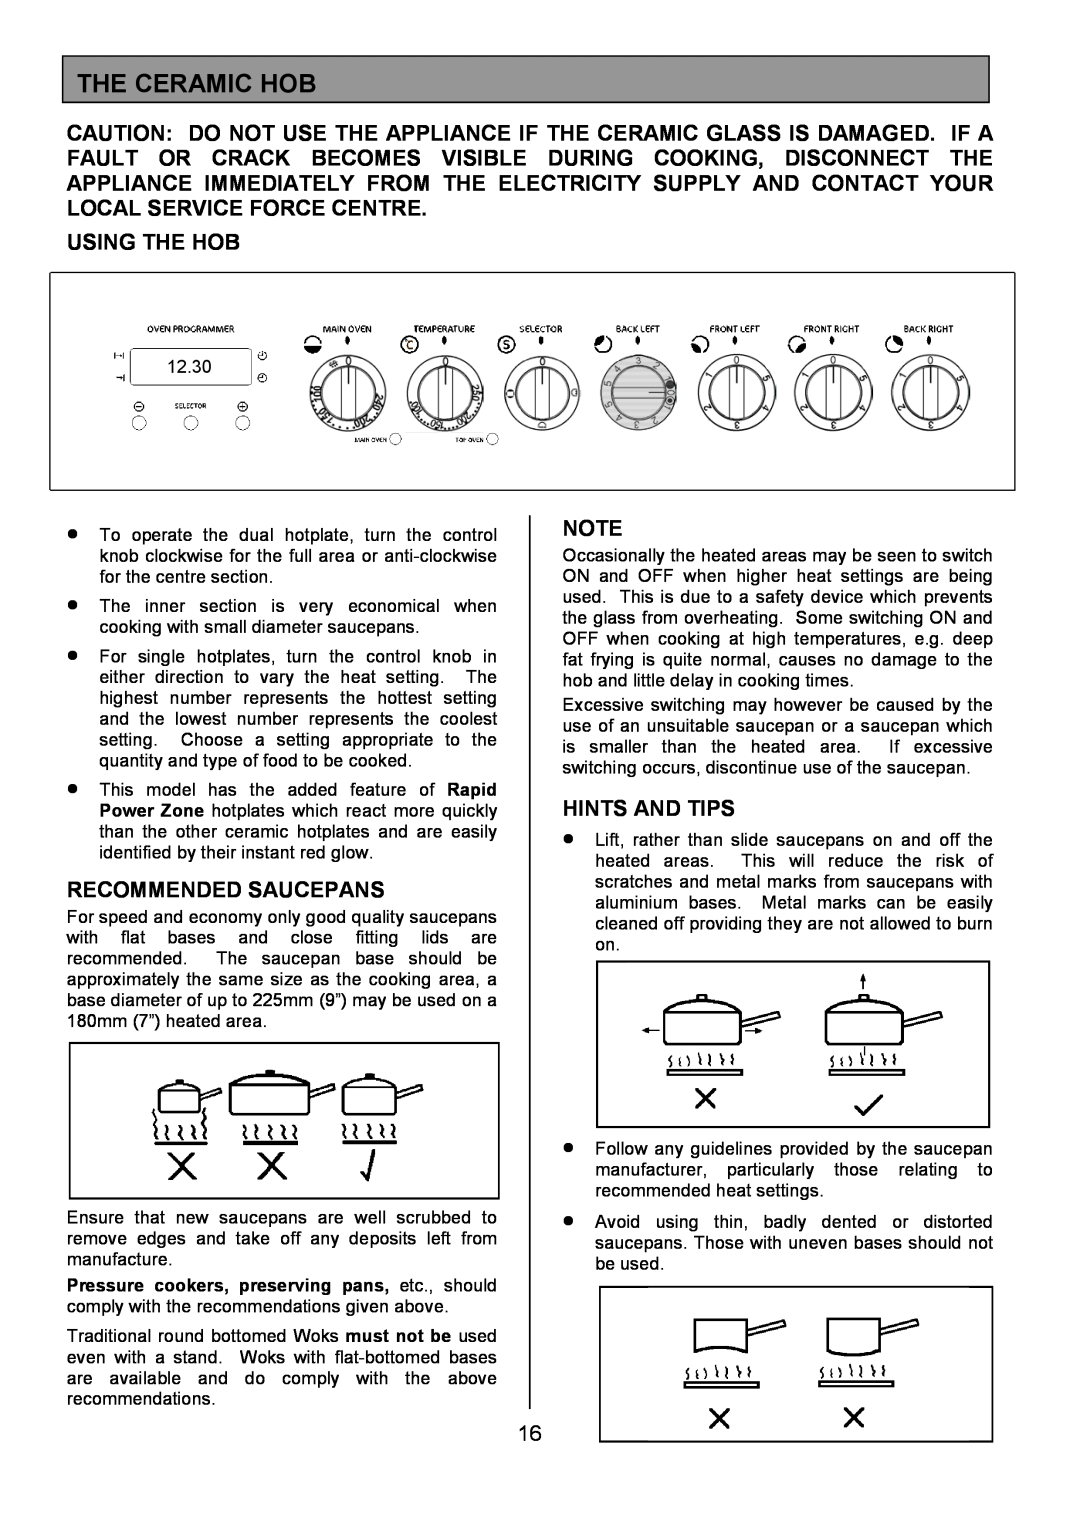 Tricity Bendix SE454 installation instructions The Ceramic Hob, Using The Hob, Recommended Saucepans, Hints And Tips 